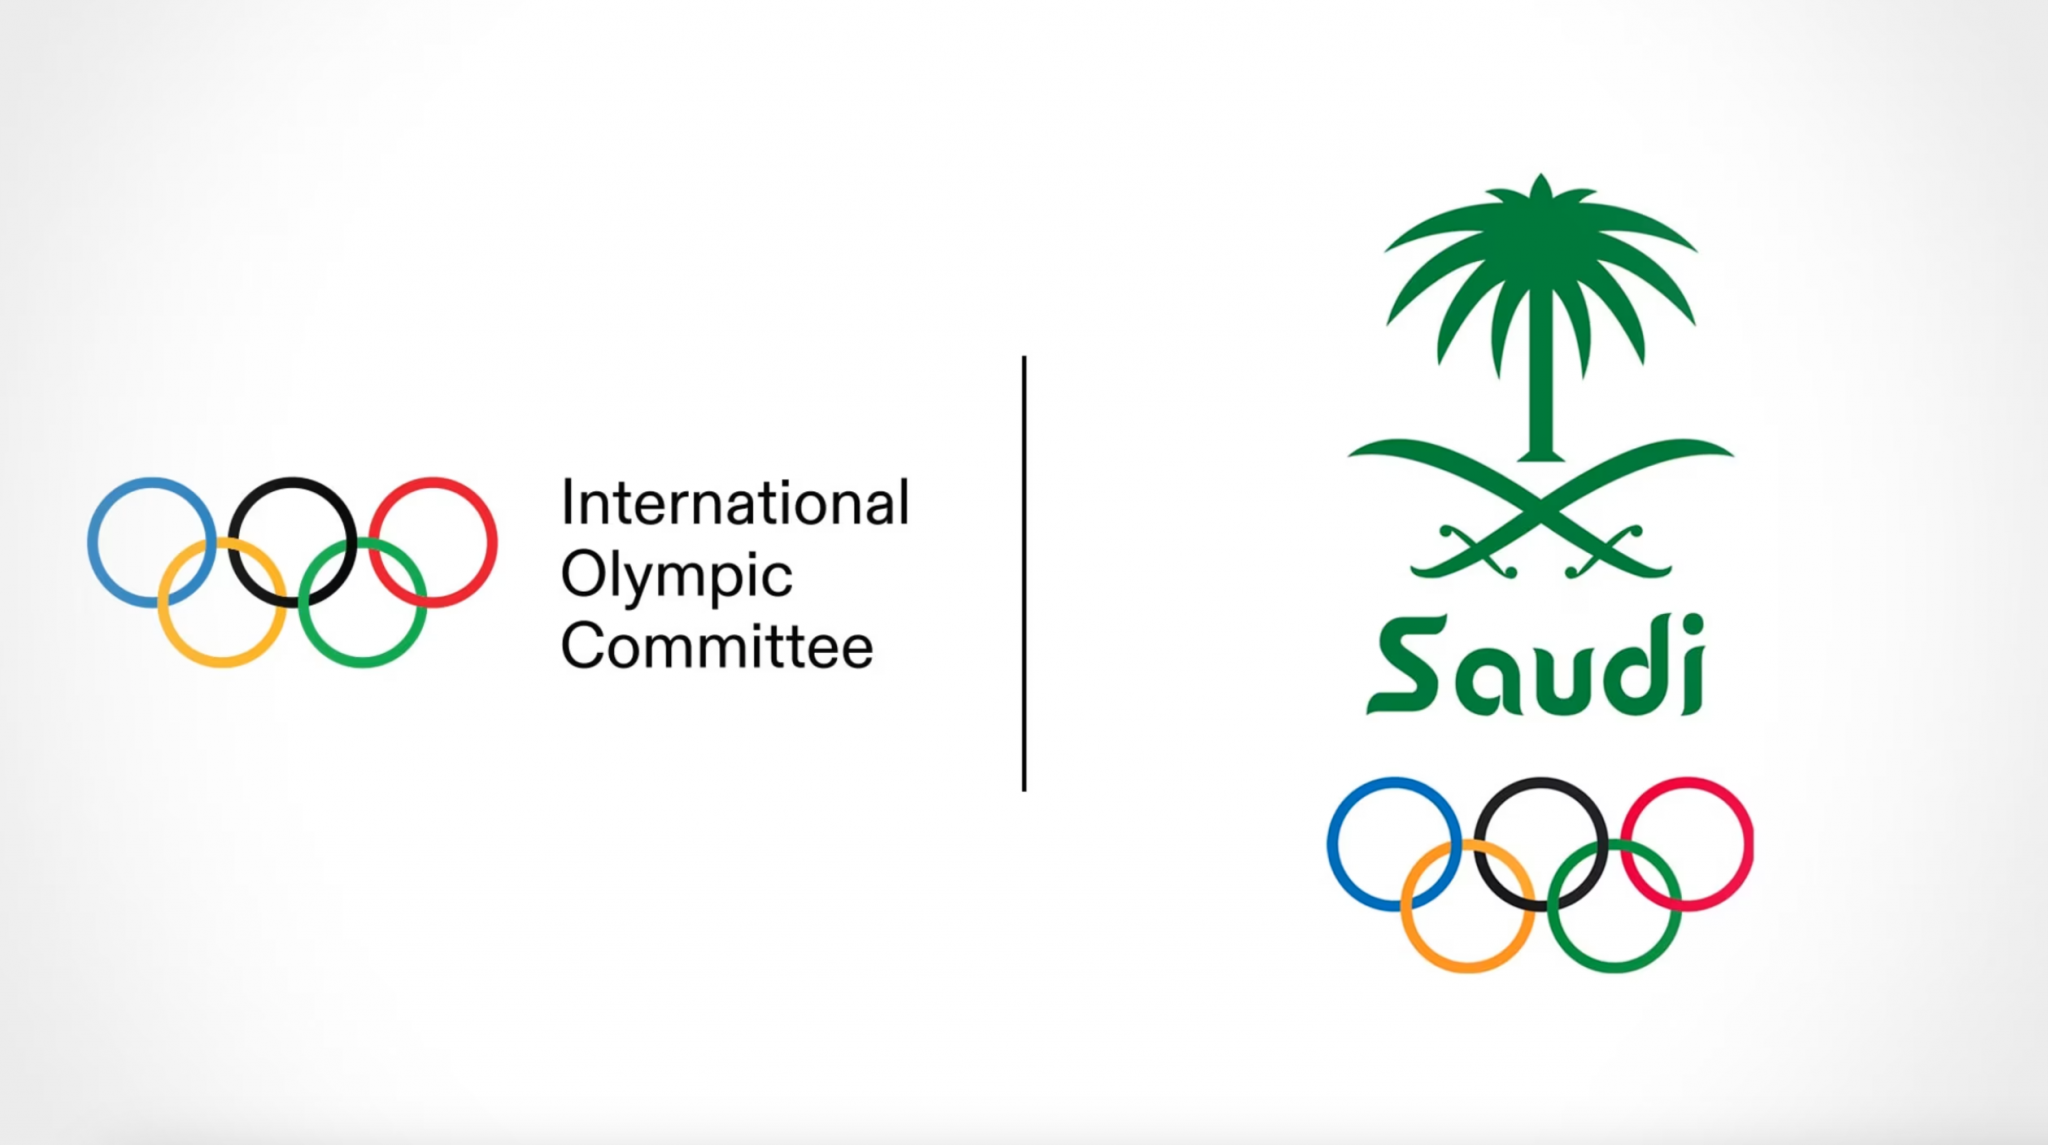 The IOC has revealed a partnership with Saudi Arabia’s NOC to host the inaugural Olympic Esports Games in 2025. OLYMPICS.COM